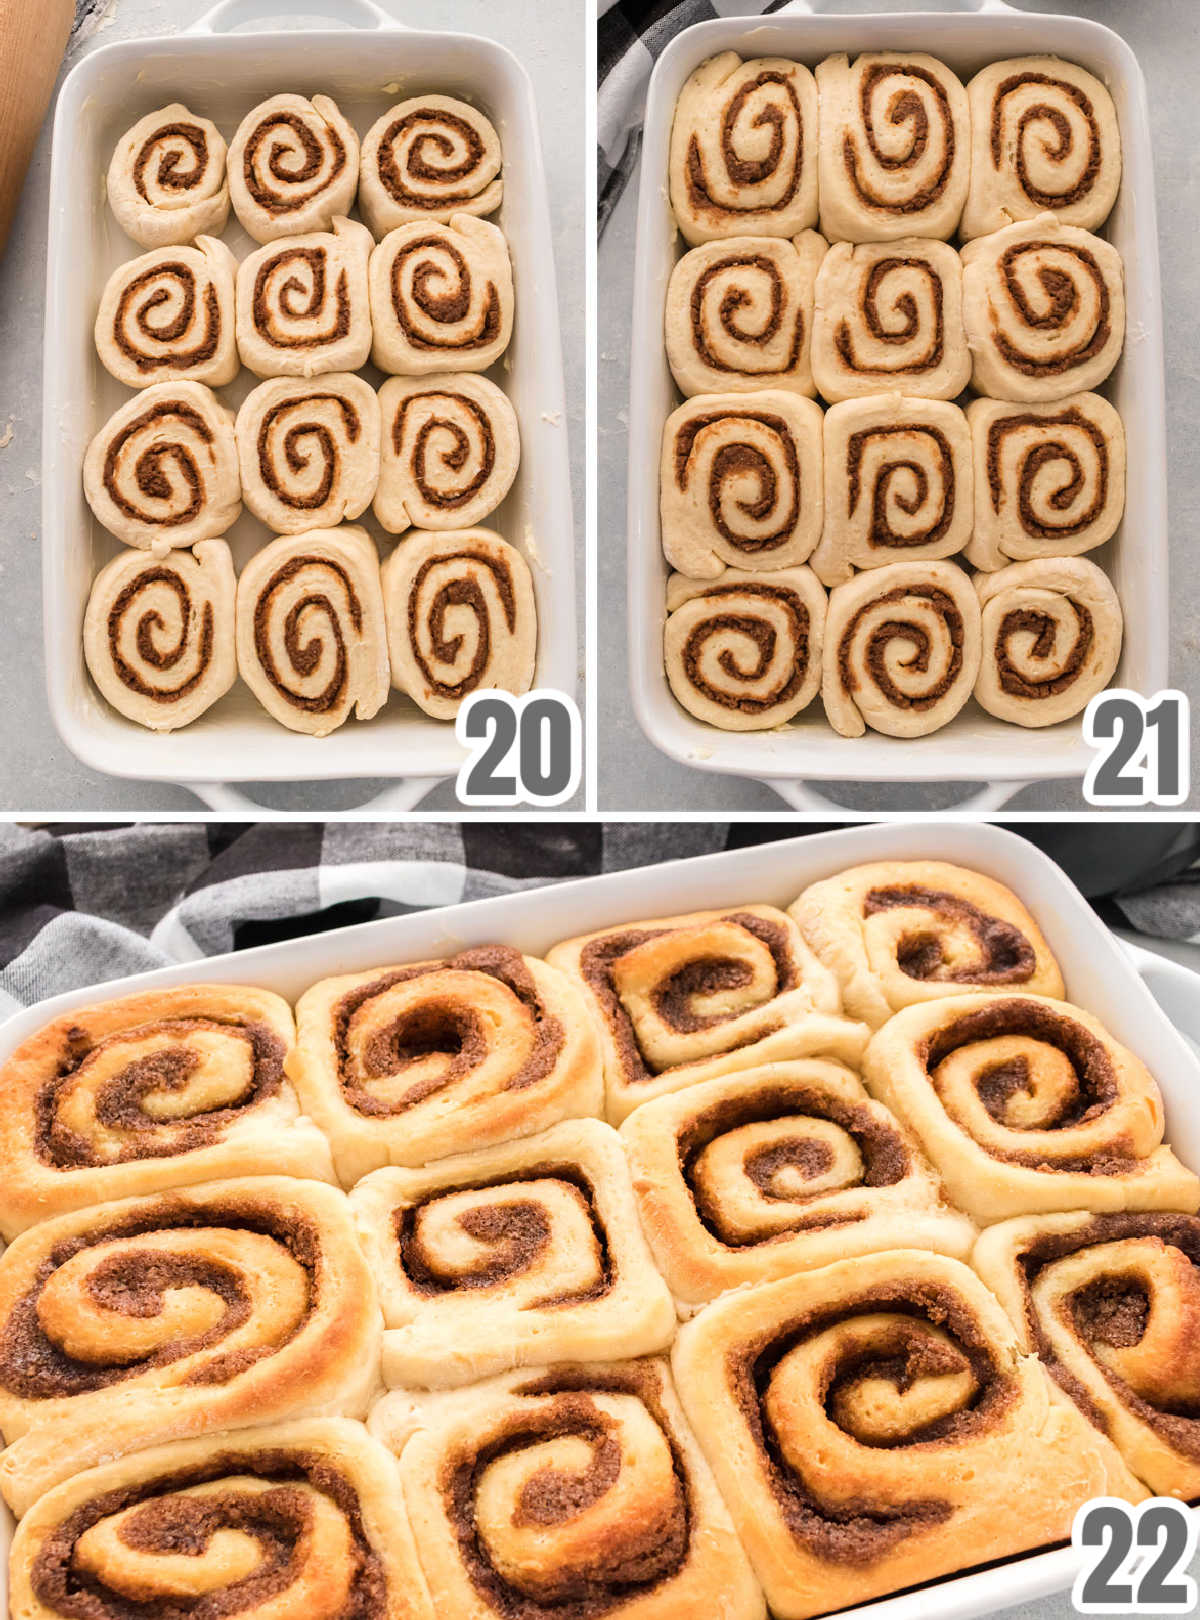 Collage image showing the cinnamon rolls before going in the oven and after coming out of the oven.